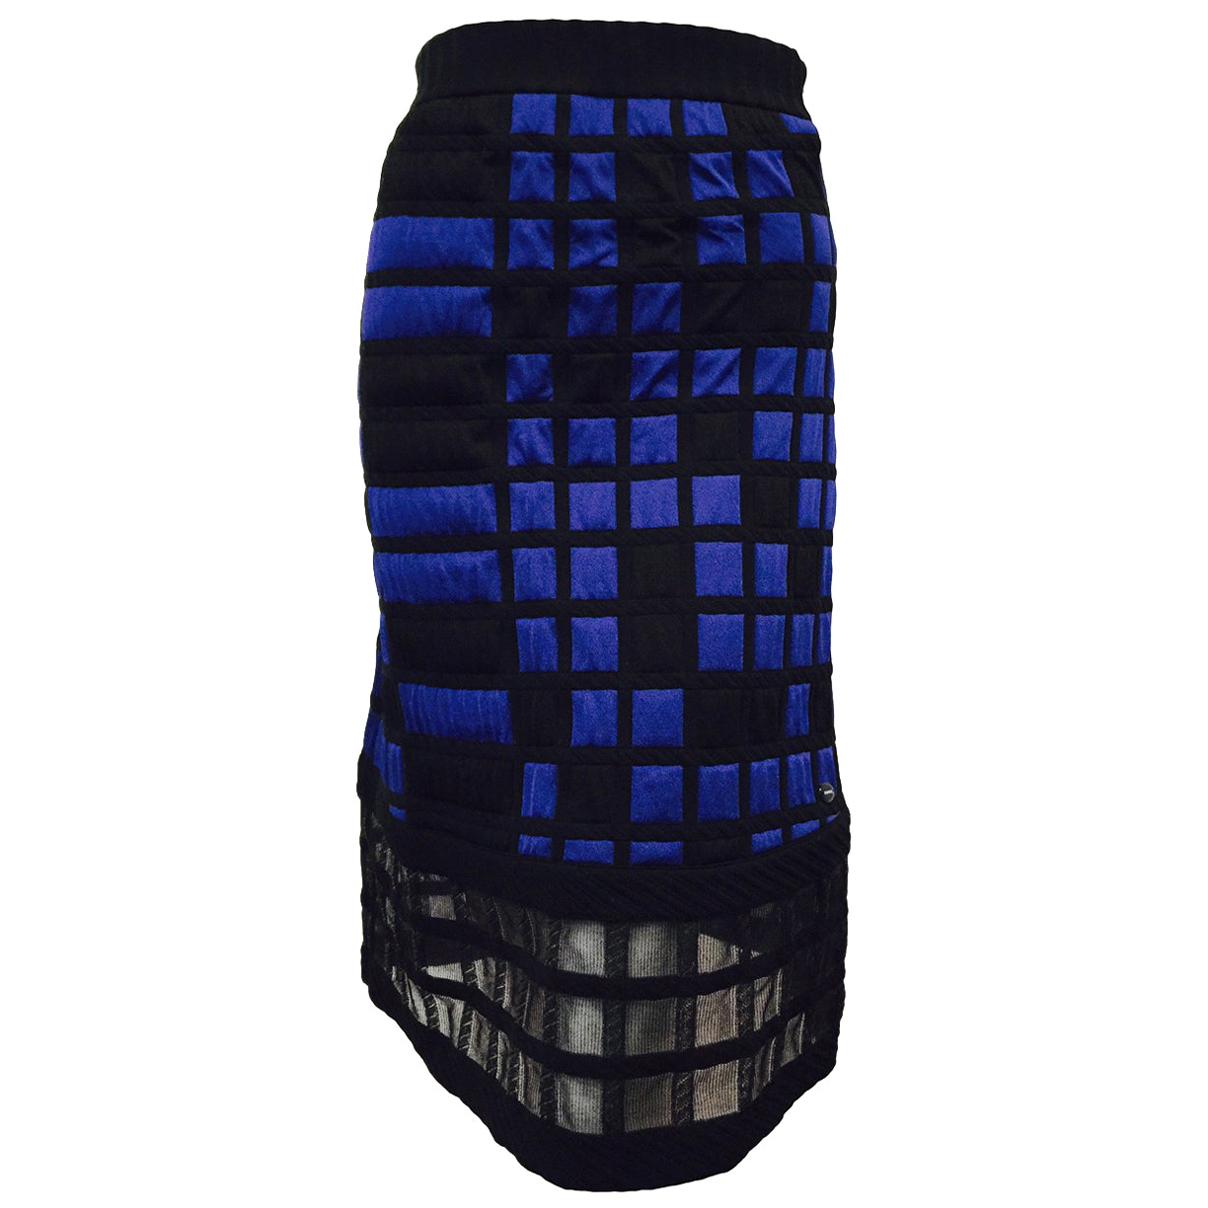 Chanel Black, Royal Blue Colorblocked Quilted A-Line Skirt With Sheer Hem 42 EU For Sale